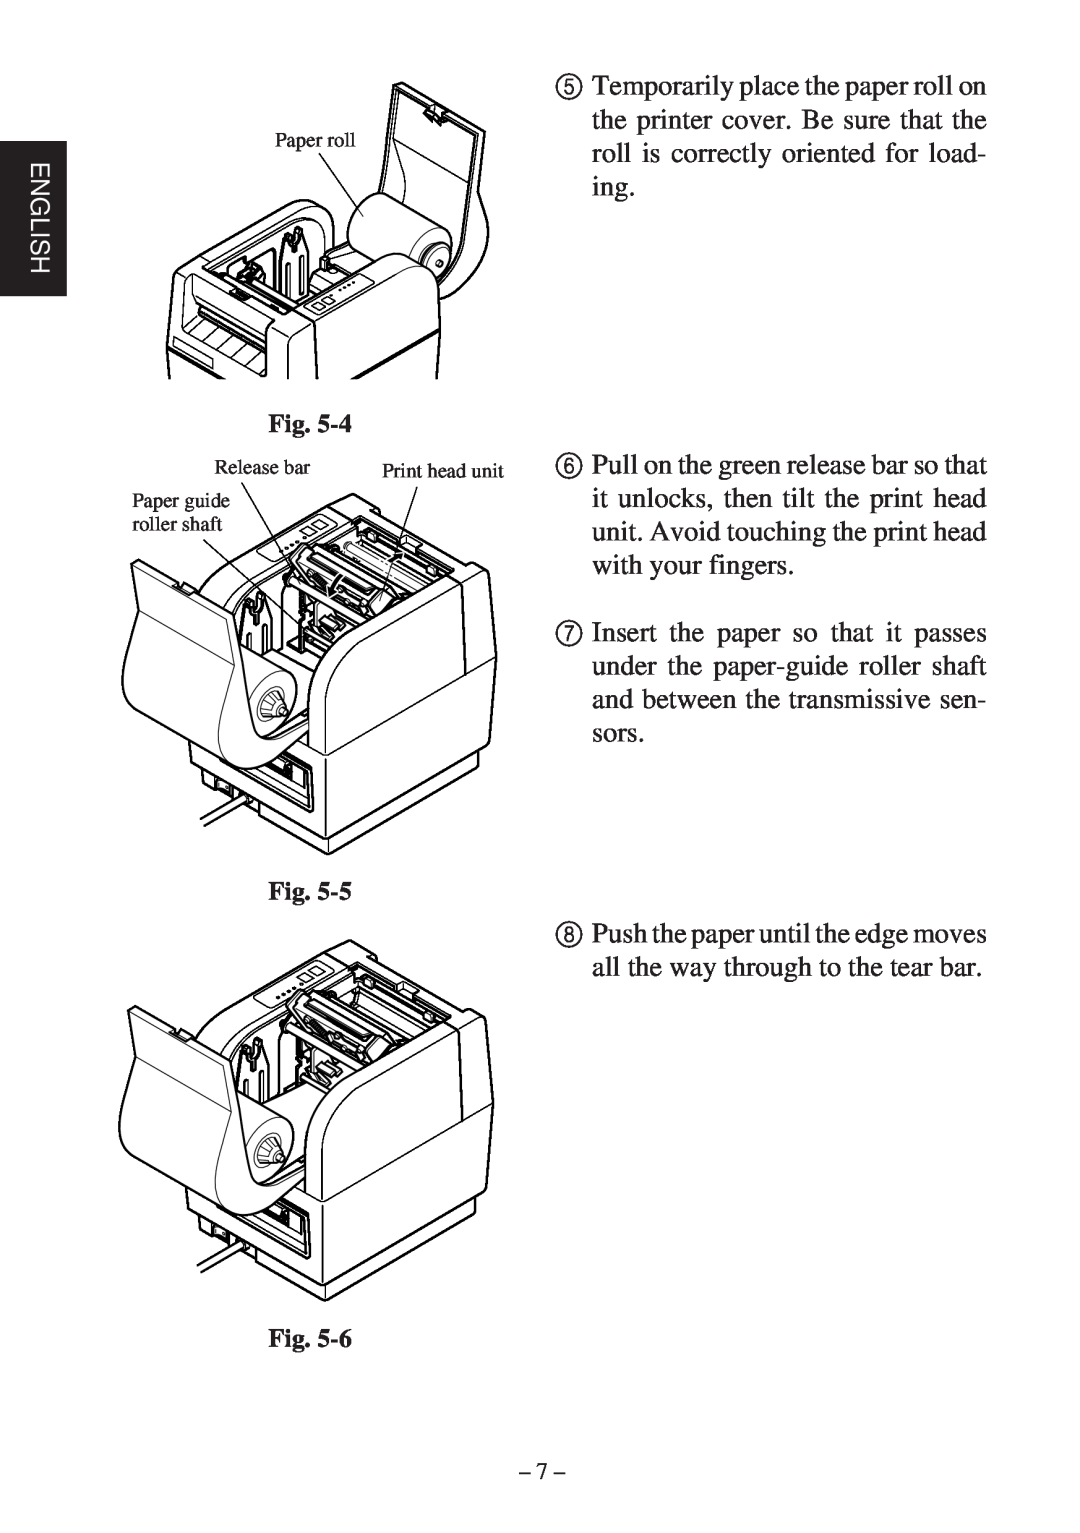 Star Micronics TSP400Z Series user manual Temporarily place the paper roll on 